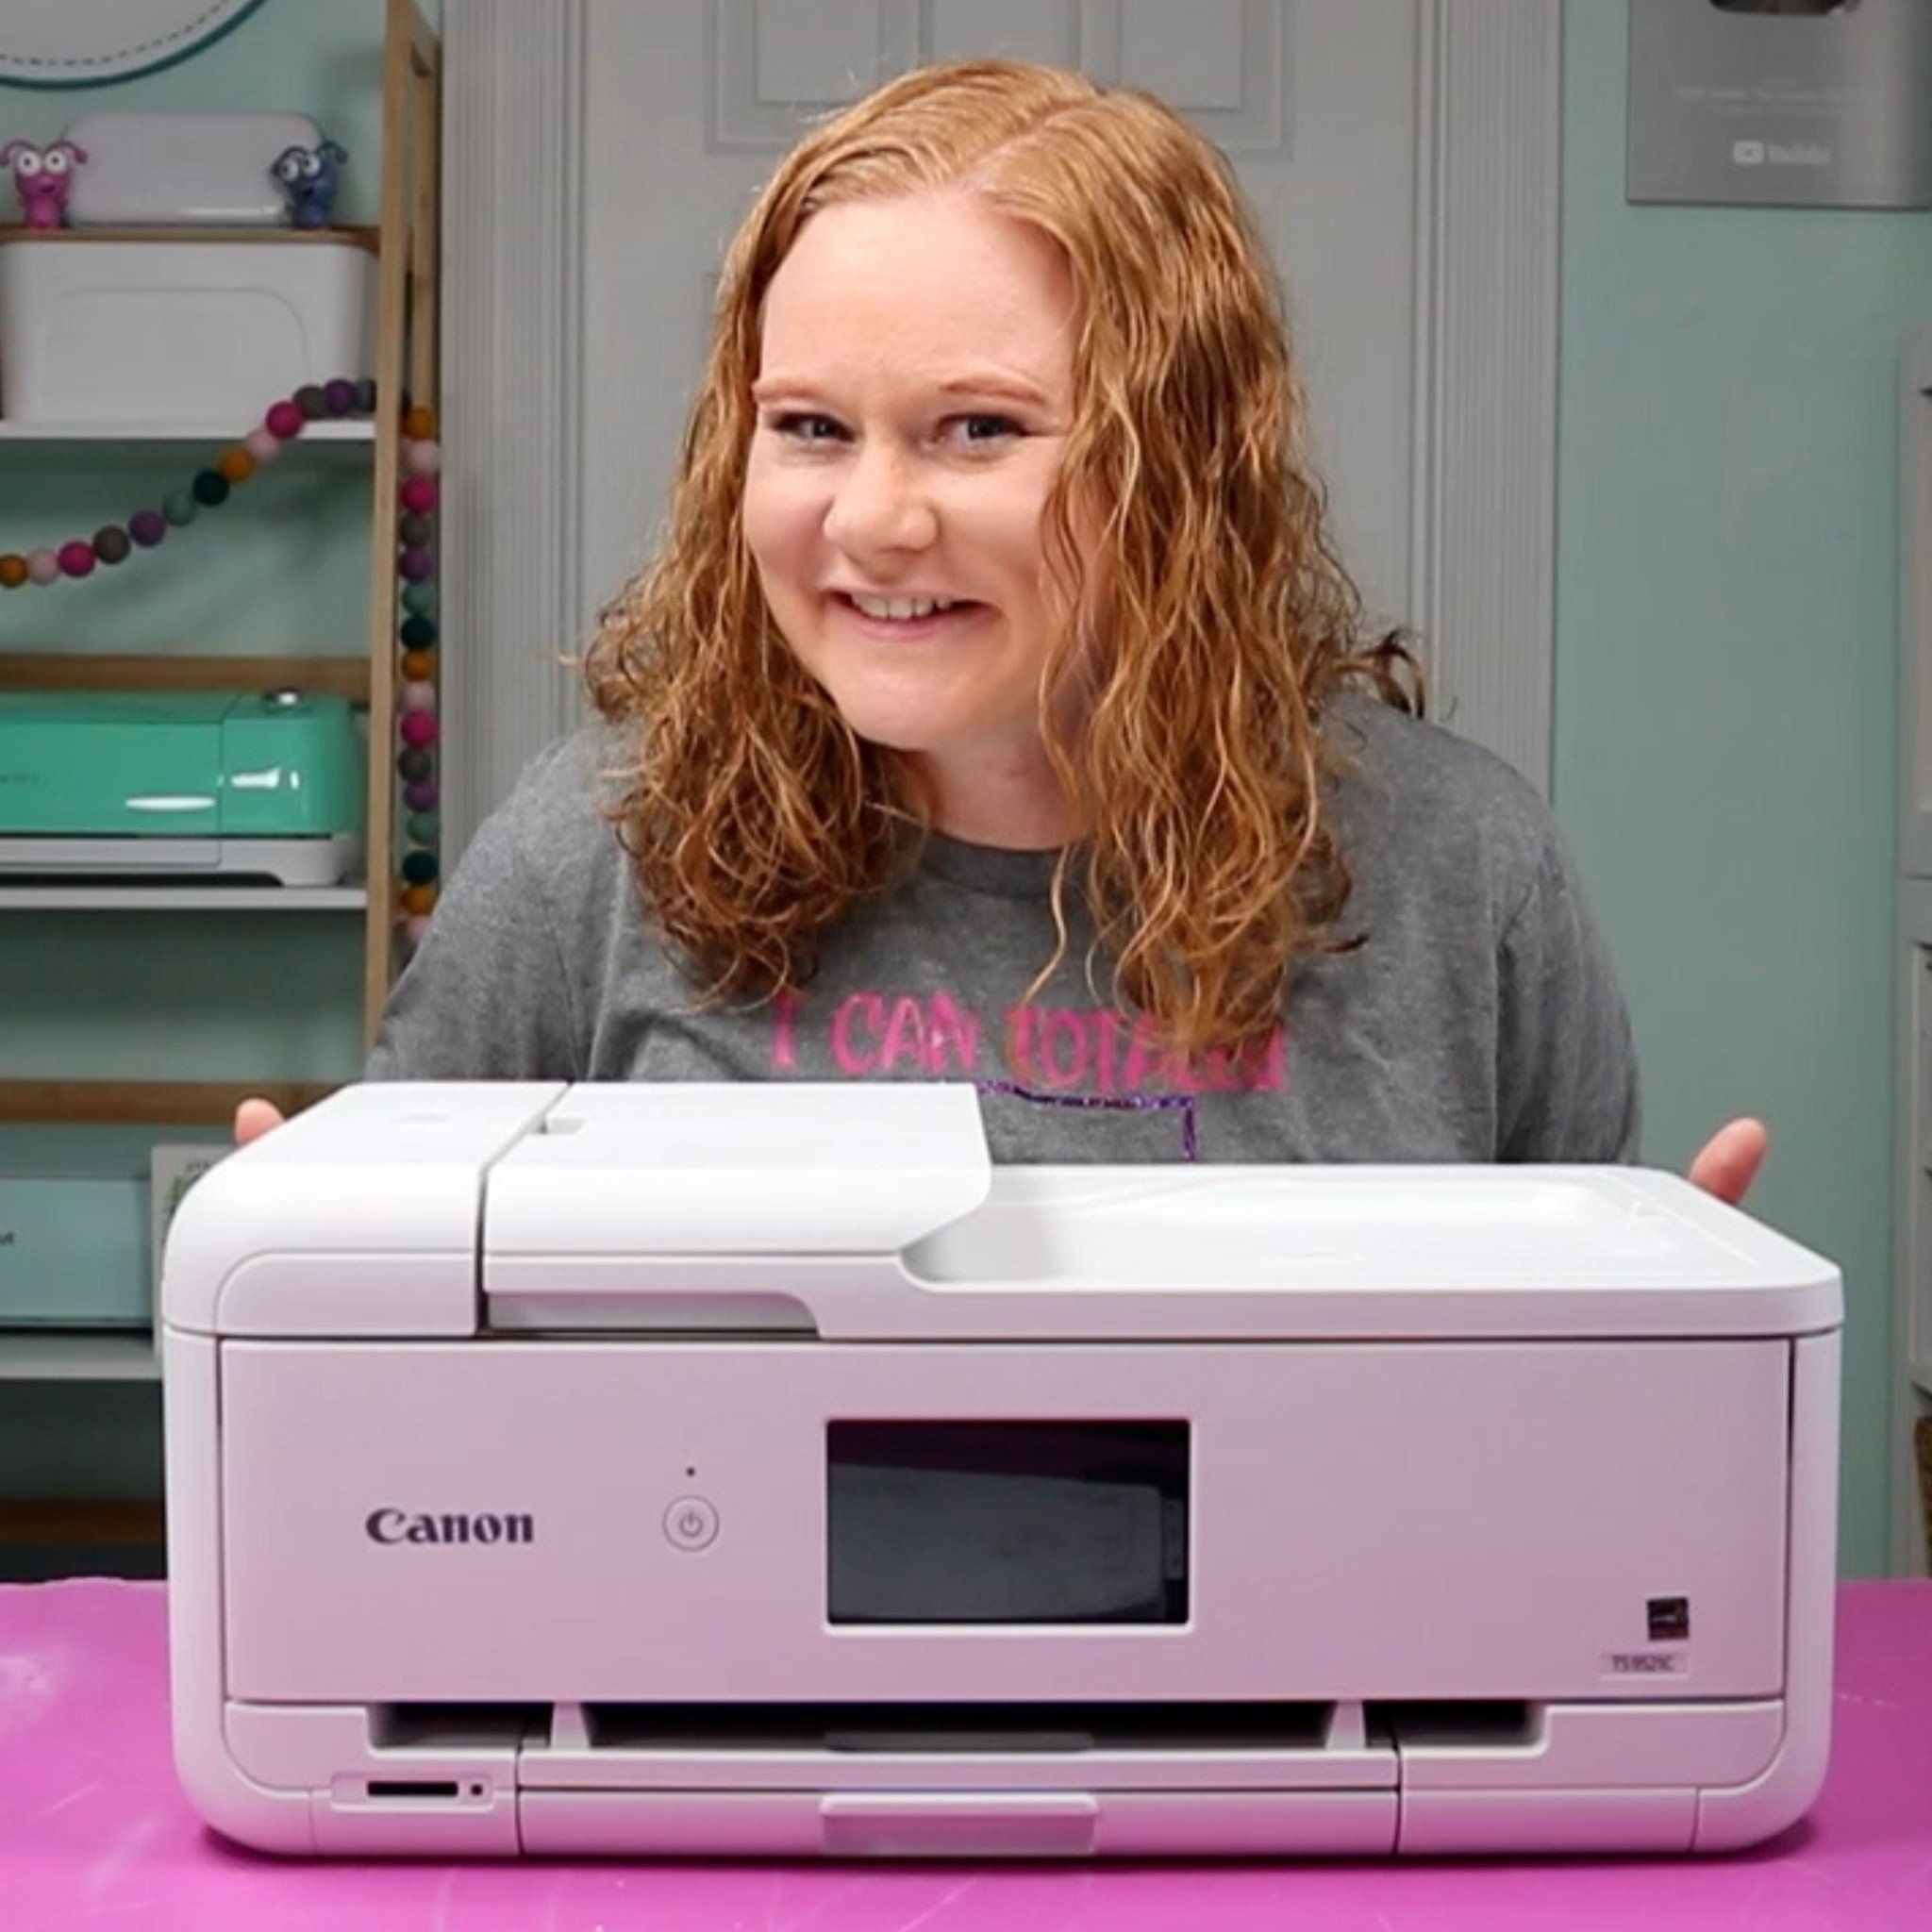 Large Format Printers for your craft room.